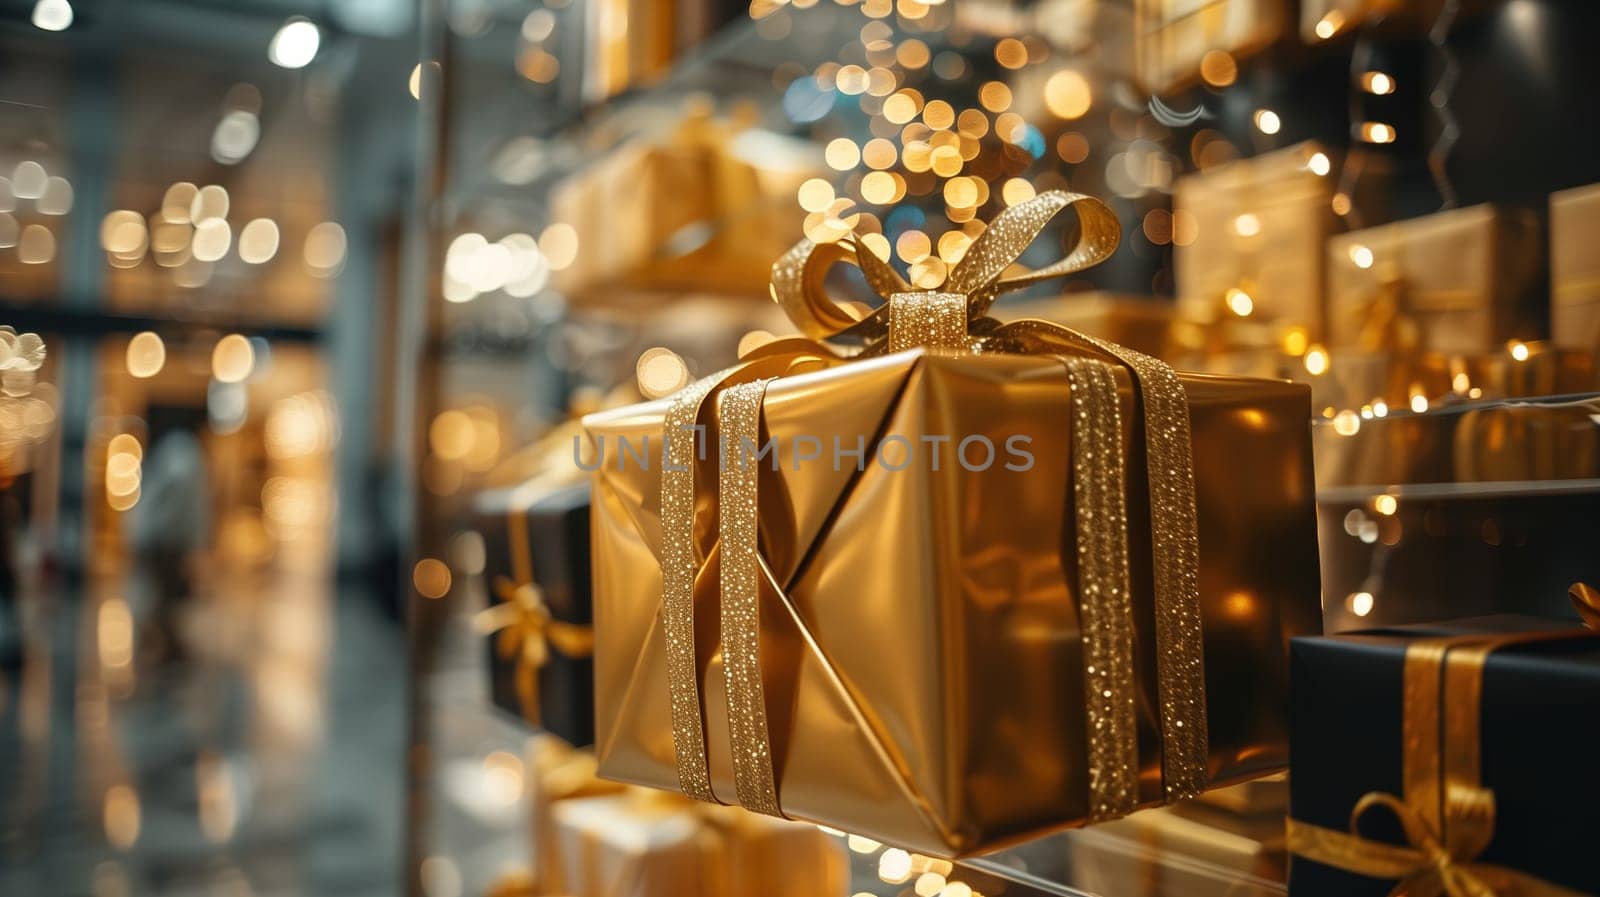 A collection of various presents are neatly arranged and displayed on a shelf, ready to be purchased or gifted. The presents come in different shapes, sizes, and colors, adding a festive touch to the setting.